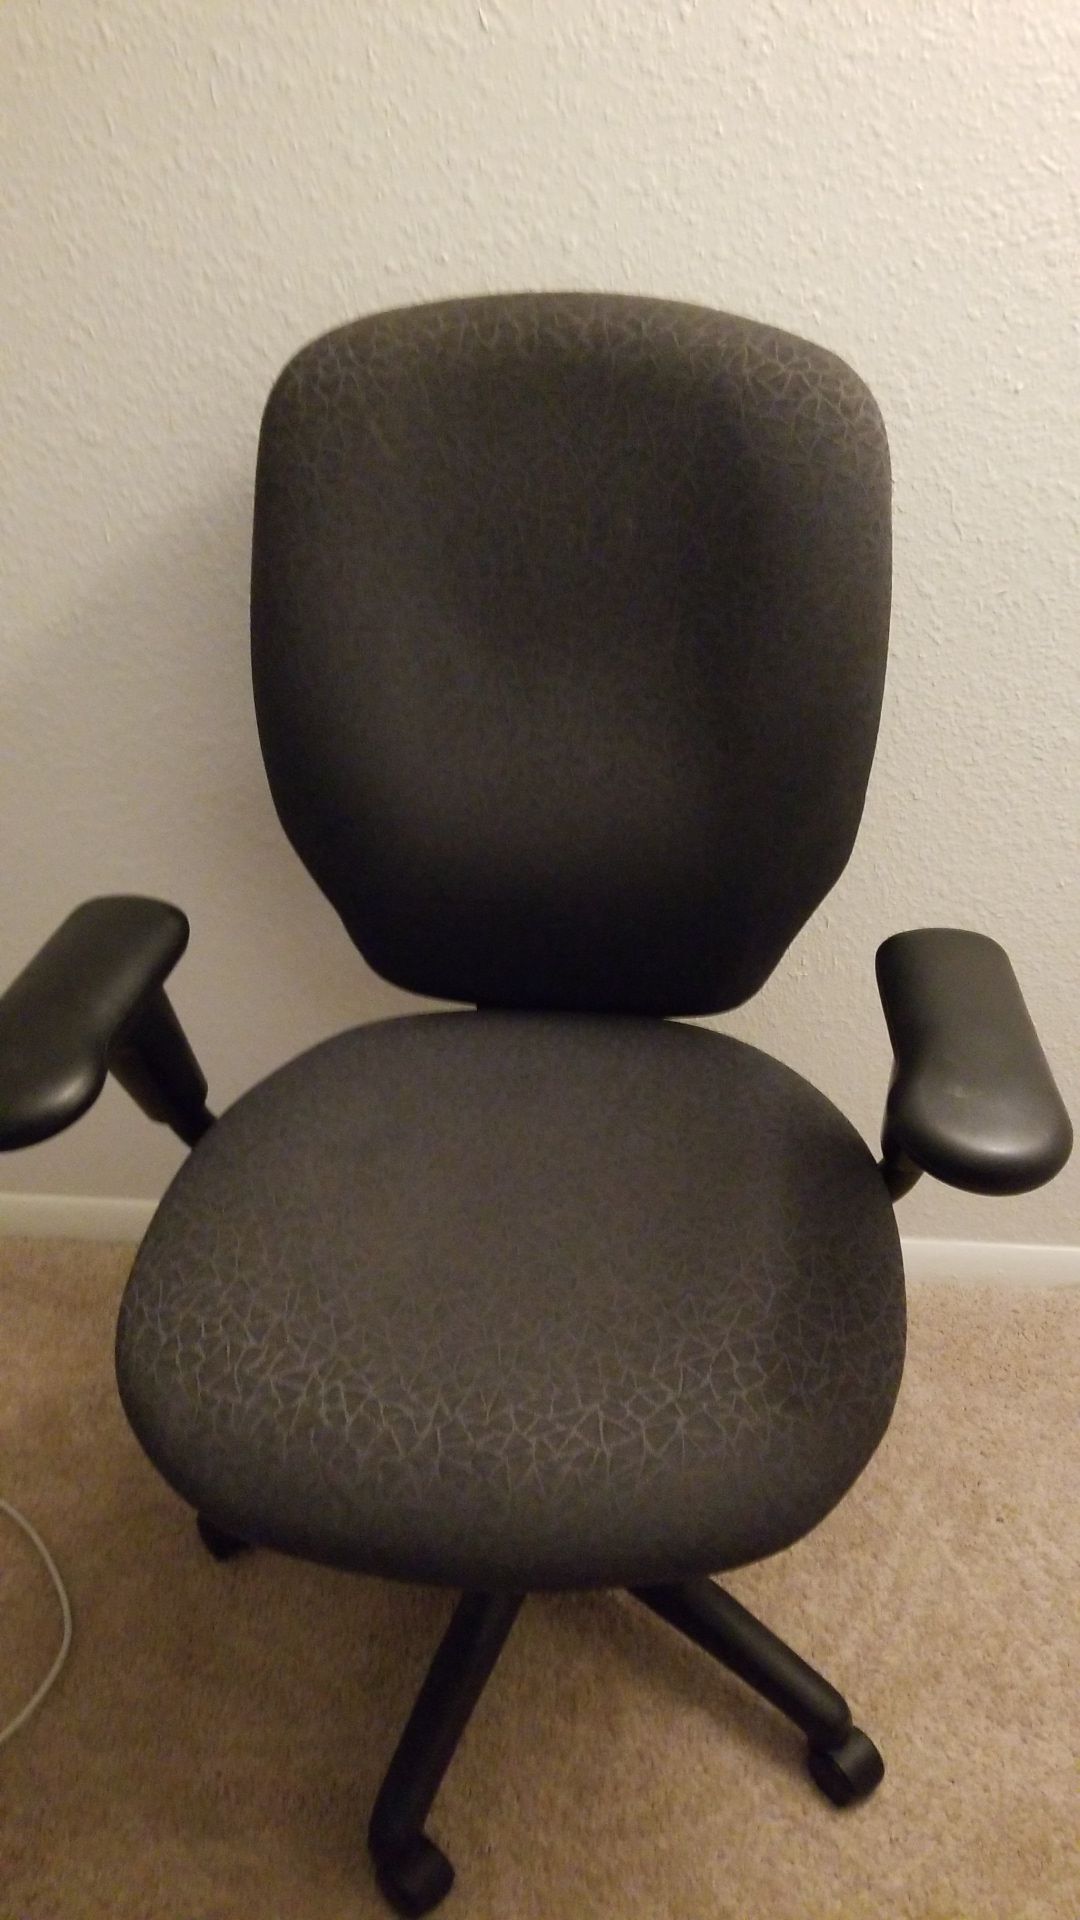 Office chair with multiple levels